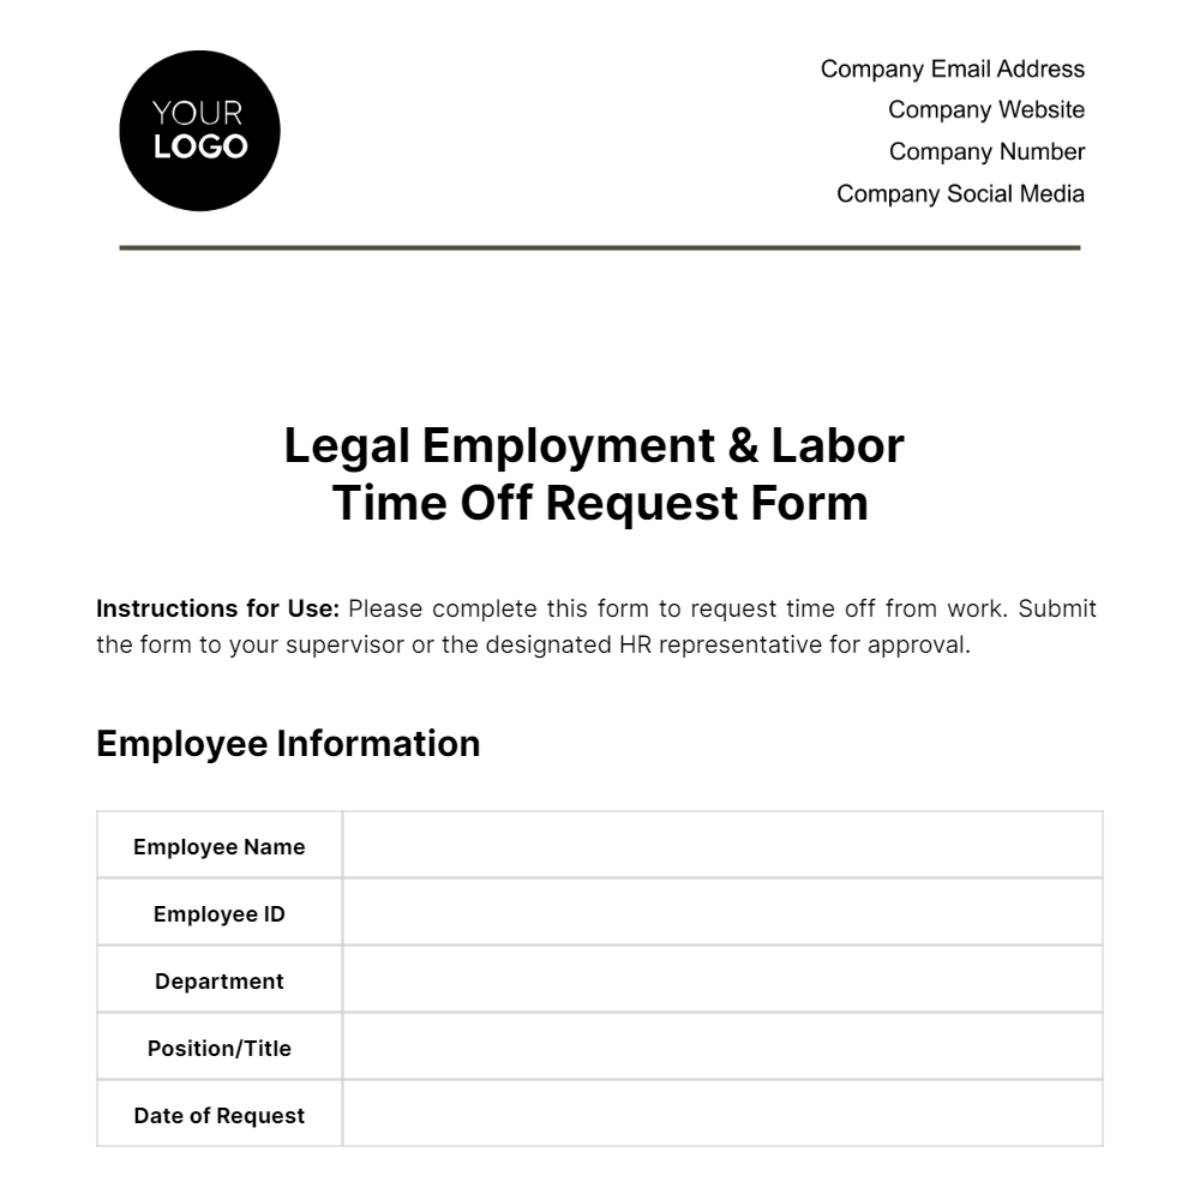 Free Legal Employment & Labor Time Off Request Form Template